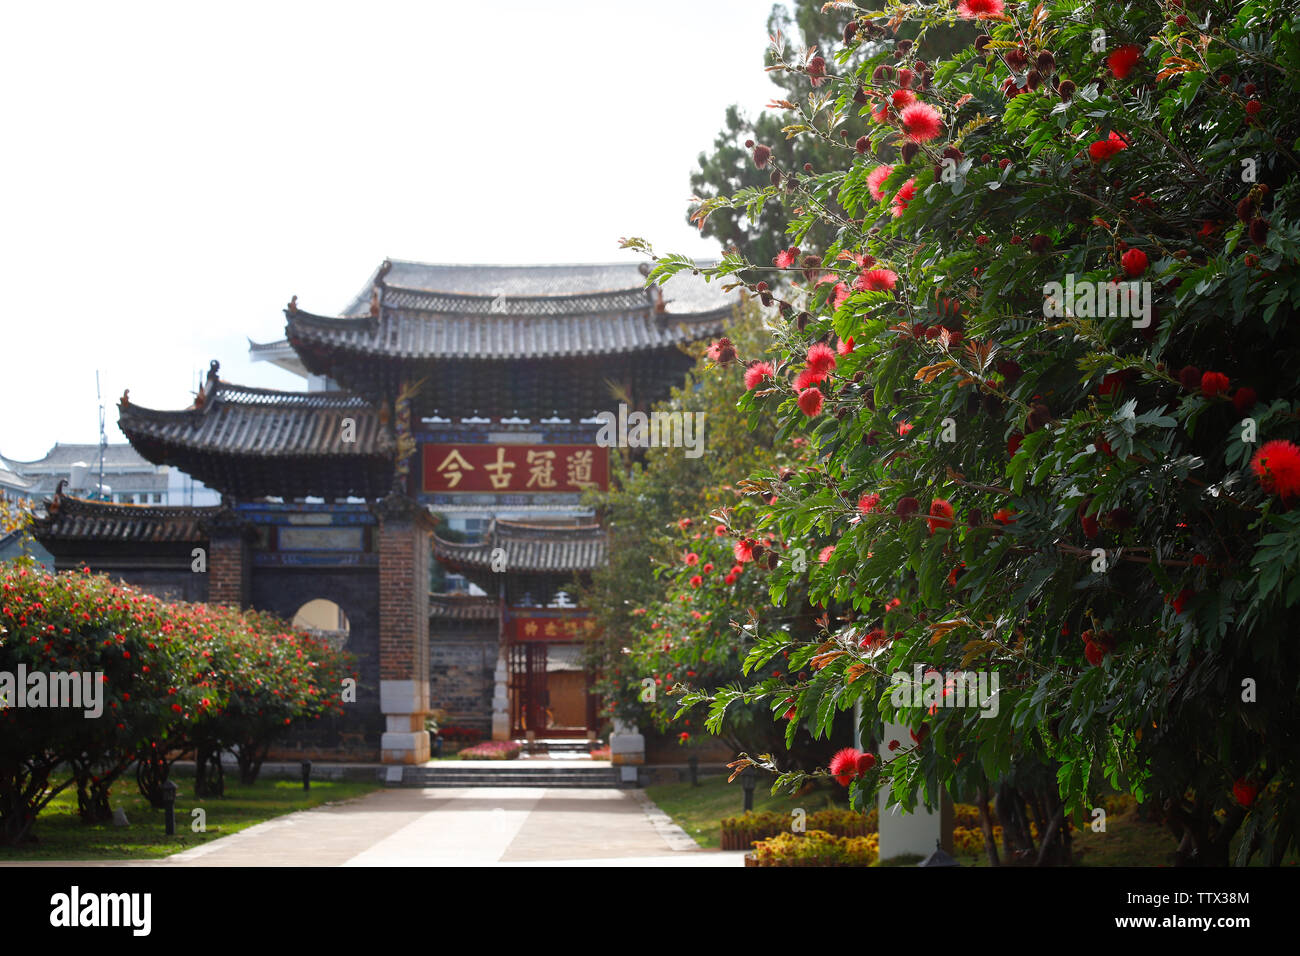 Red flowers with the Temple of Confucius in the background. This is the largest temple of the Yunnan, China. Jianshui, Yunnan, China - November, 2018 Stock Photo